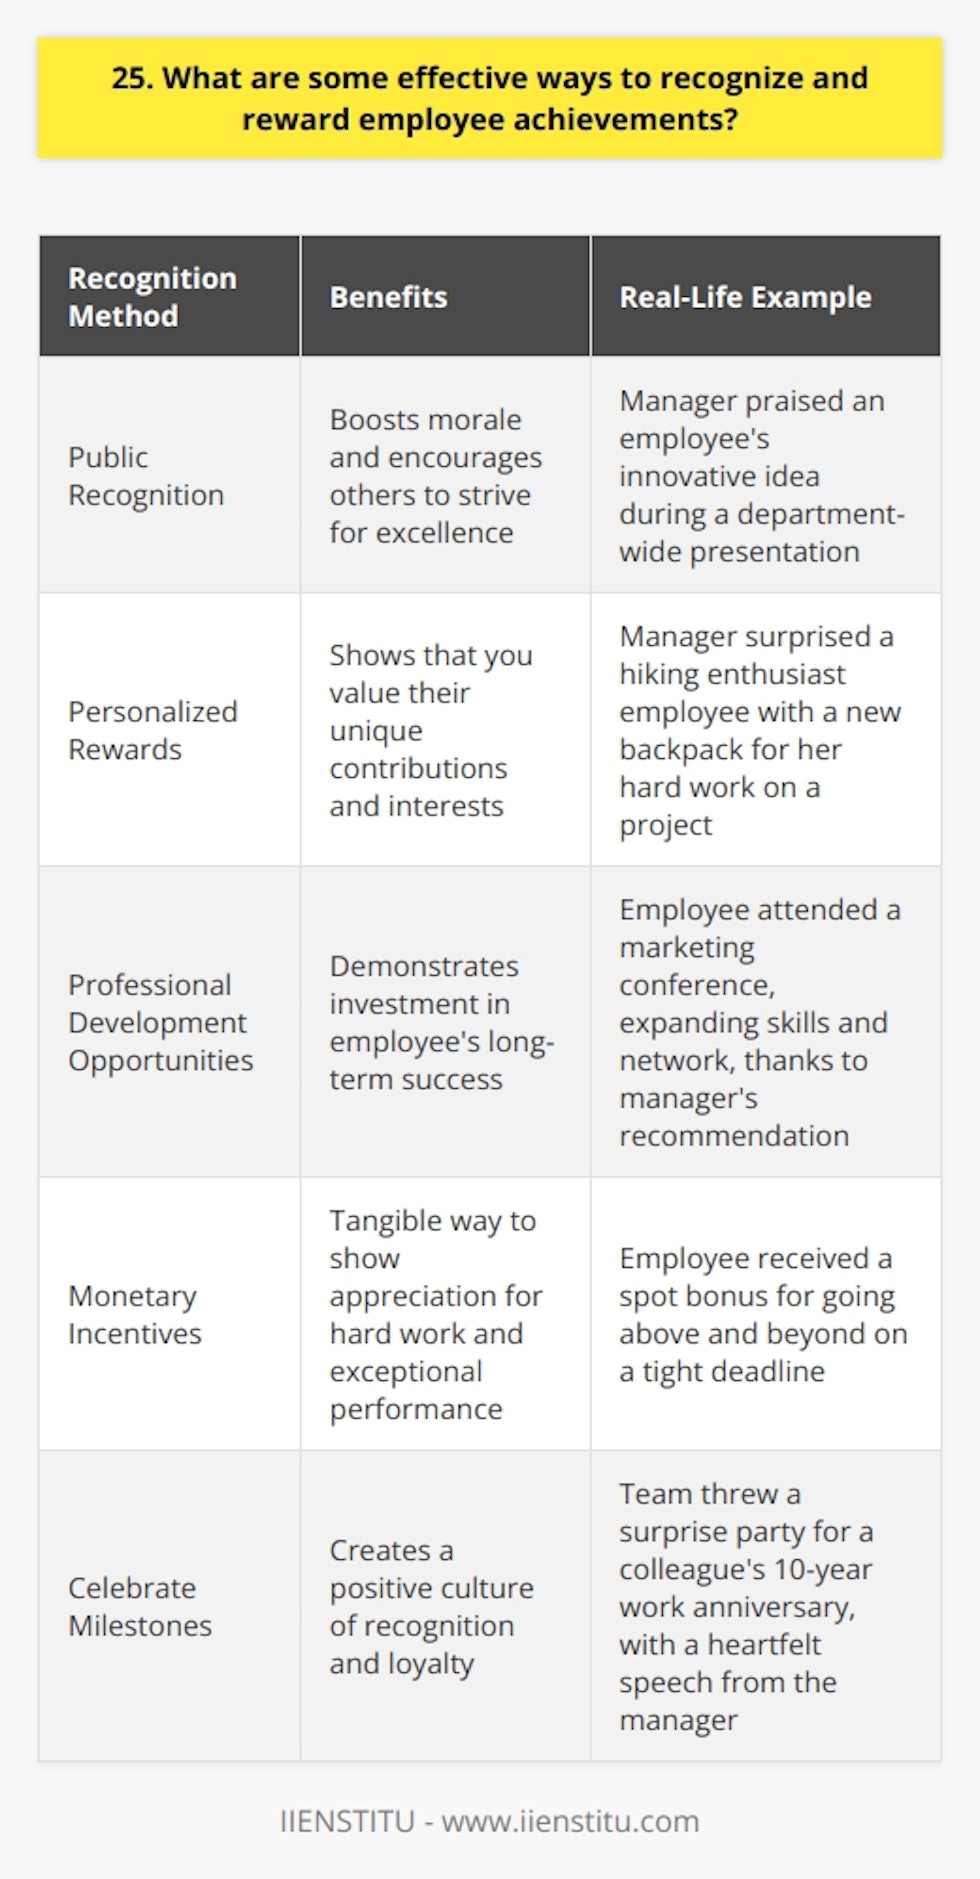 Recognizing and rewarding employee achievements is crucial for maintaining a motivated and productive workforce. Here are some effective ways to do so: Public Recognition Acknowledge outstanding performance in front of colleagues, such as during team meetings or company-wide events. This boosts morale and encourages others to strive for excellence. I once saw a manager praise an employees innovative idea during a department-wide presentation, and it was inspiring to see the pride on the employees face. Personalized Rewards Tailor rewards to individual preferences, such as a gift card to their favorite store or an extra day off. This shows that you value their unique contributions and interests. I remember a colleague who loved hiking, and her manager surprised her with a new backpack as a token of appreciation for her hard work on a project. Professional Development Opportunities Offer training, workshops, or conference attendance to support employee growth and development. This demonstrates your investment in their long-term success. I had the chance to attend a marketing conference last year, thanks to my managers recommendation, and it expanded my skills and network tremendously. Monetary Incentives Provide bonuses, raises, or profit-sharing plans to recognize exceptional performance and results. Money talks, and its a tangible way to show appreciation for hard work. I once received a spot bonus for going above and beyond on a tight deadline, and it made me feel truly valued by my company. Celebrate Milestones Mark significant achievements or anniversaries with a special event or gift. This creates a positive culture of recognition and loyalty. My team once threw a surprise party for a colleagues 10-year work anniversary, complete with a heartfelt speech from our manager, and it was a memorable moment of camaraderie and appreciation. By implementing a variety of recognition and reward strategies, you can create a workplace culture that values and celebrates employee achievements. Its not just about the reward itself, but the thought and effort behind it that makes employees feel truly appreciated and motivated to continue doing their best work.